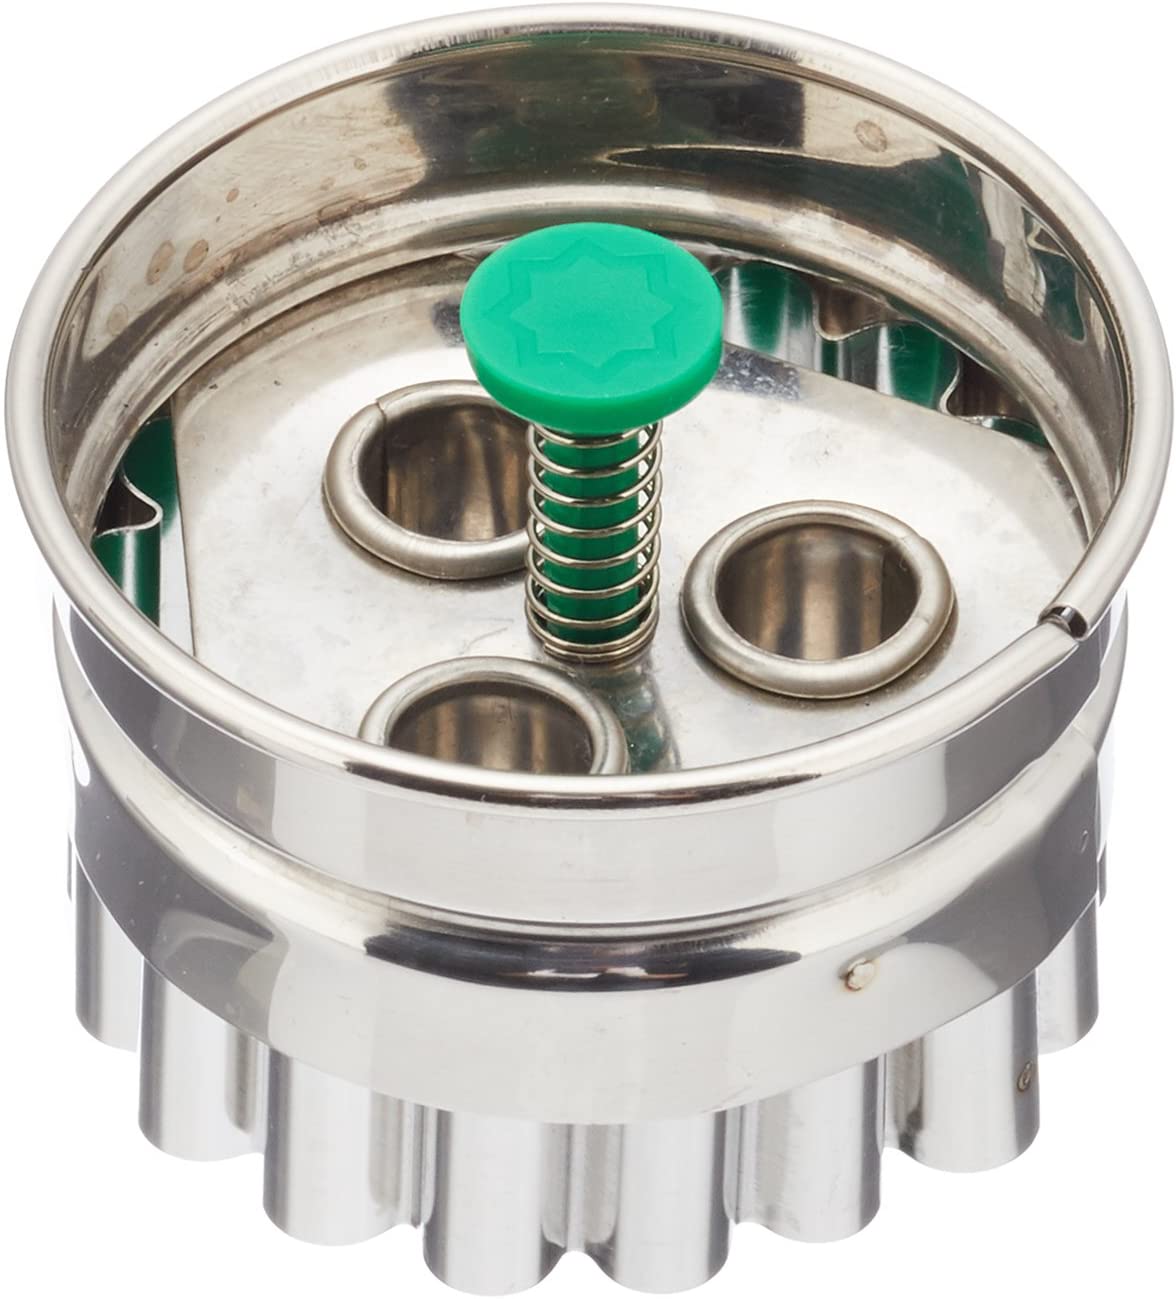 Staedter Städter Linzer 954053 3-Hole 4.8 x 4.8 x 4.8 cm/Cookie Small, Stainless Steel, Silver/Green